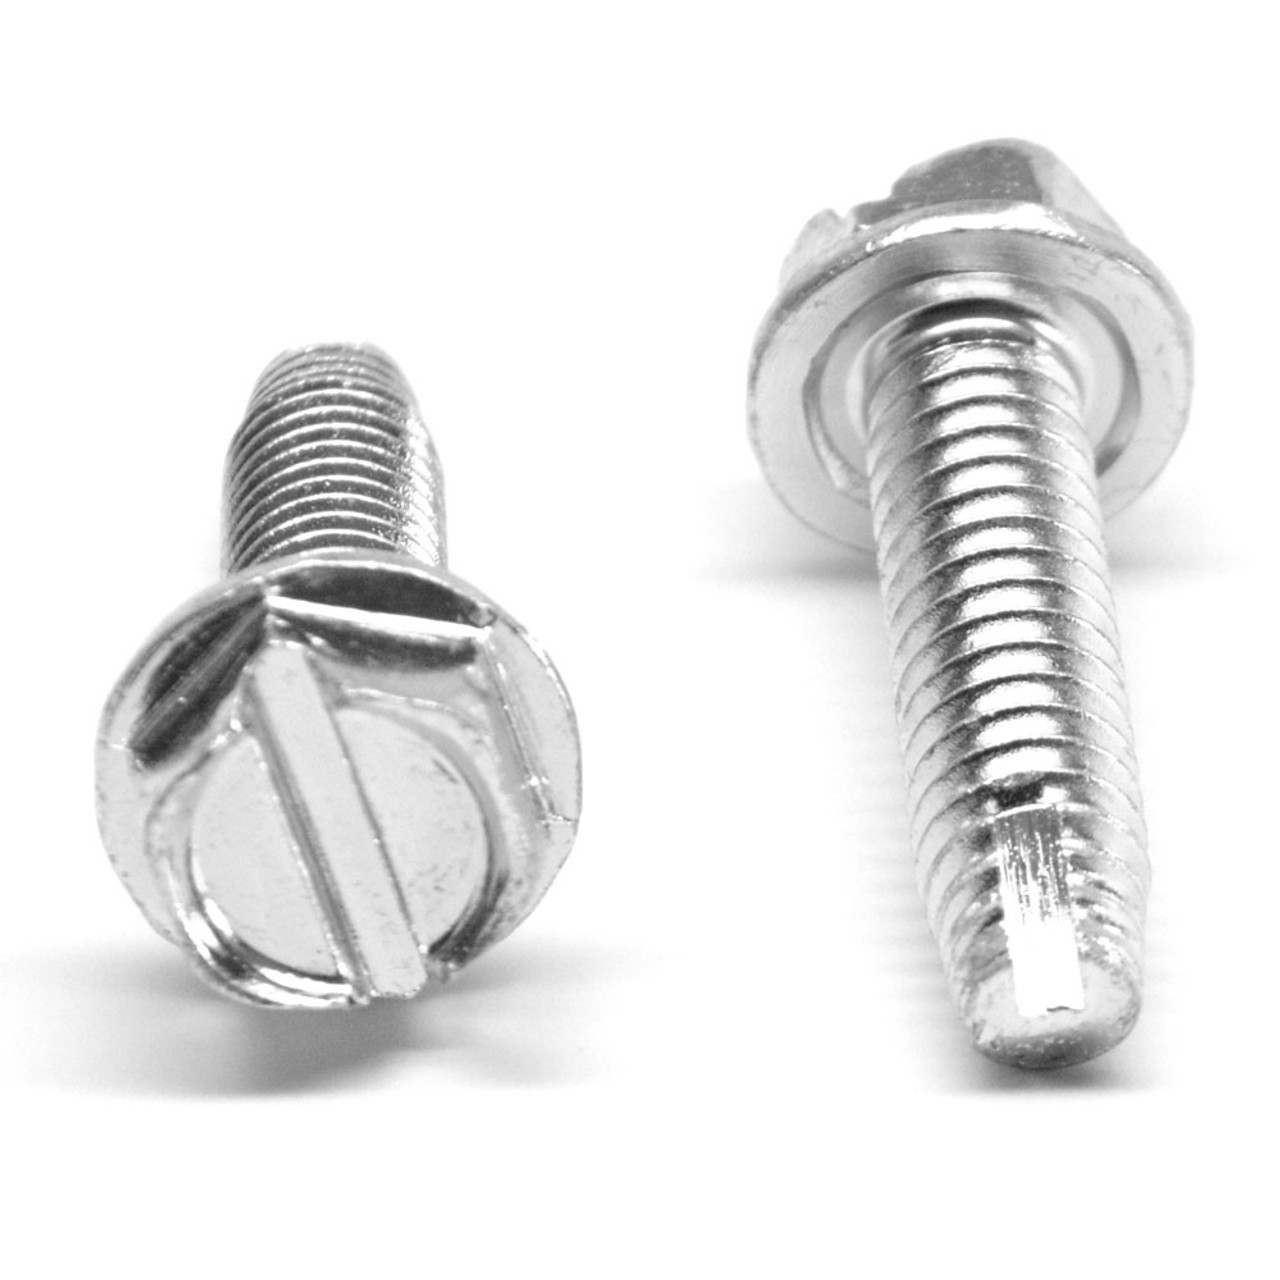 #8-32 x 3/4" (FT) Coarse Thread Thread Cutting Screw Slotted Hex Washer Head Type 1 Low Carbon Steel Zinc Plated